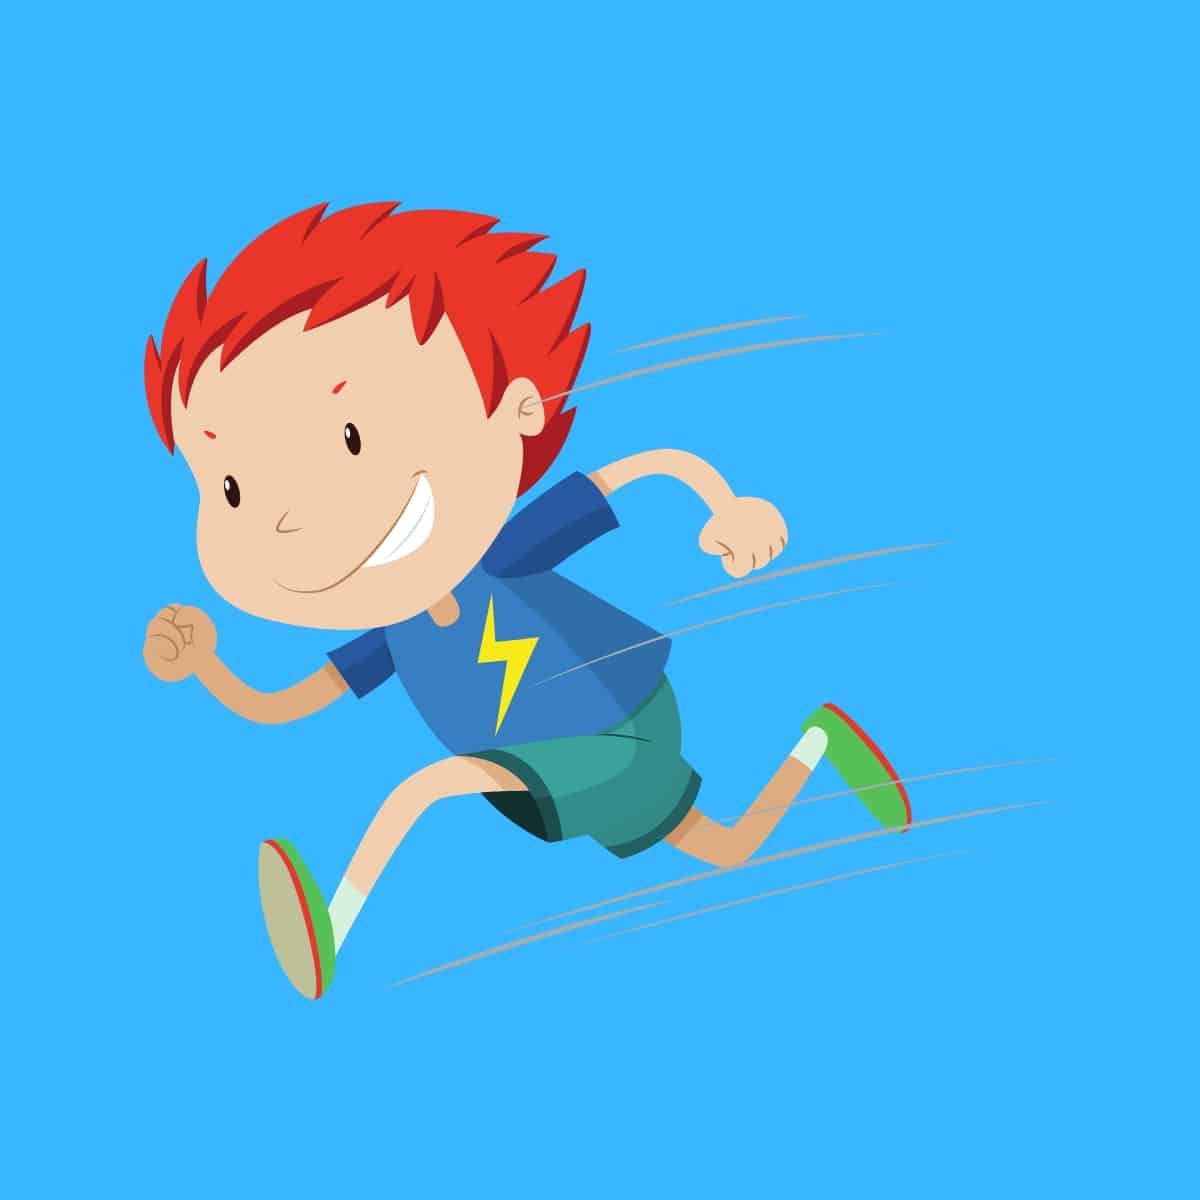 Cartoon graphic of a boy with red hair running fast with a lightning bolt on his shirt on a blue background.